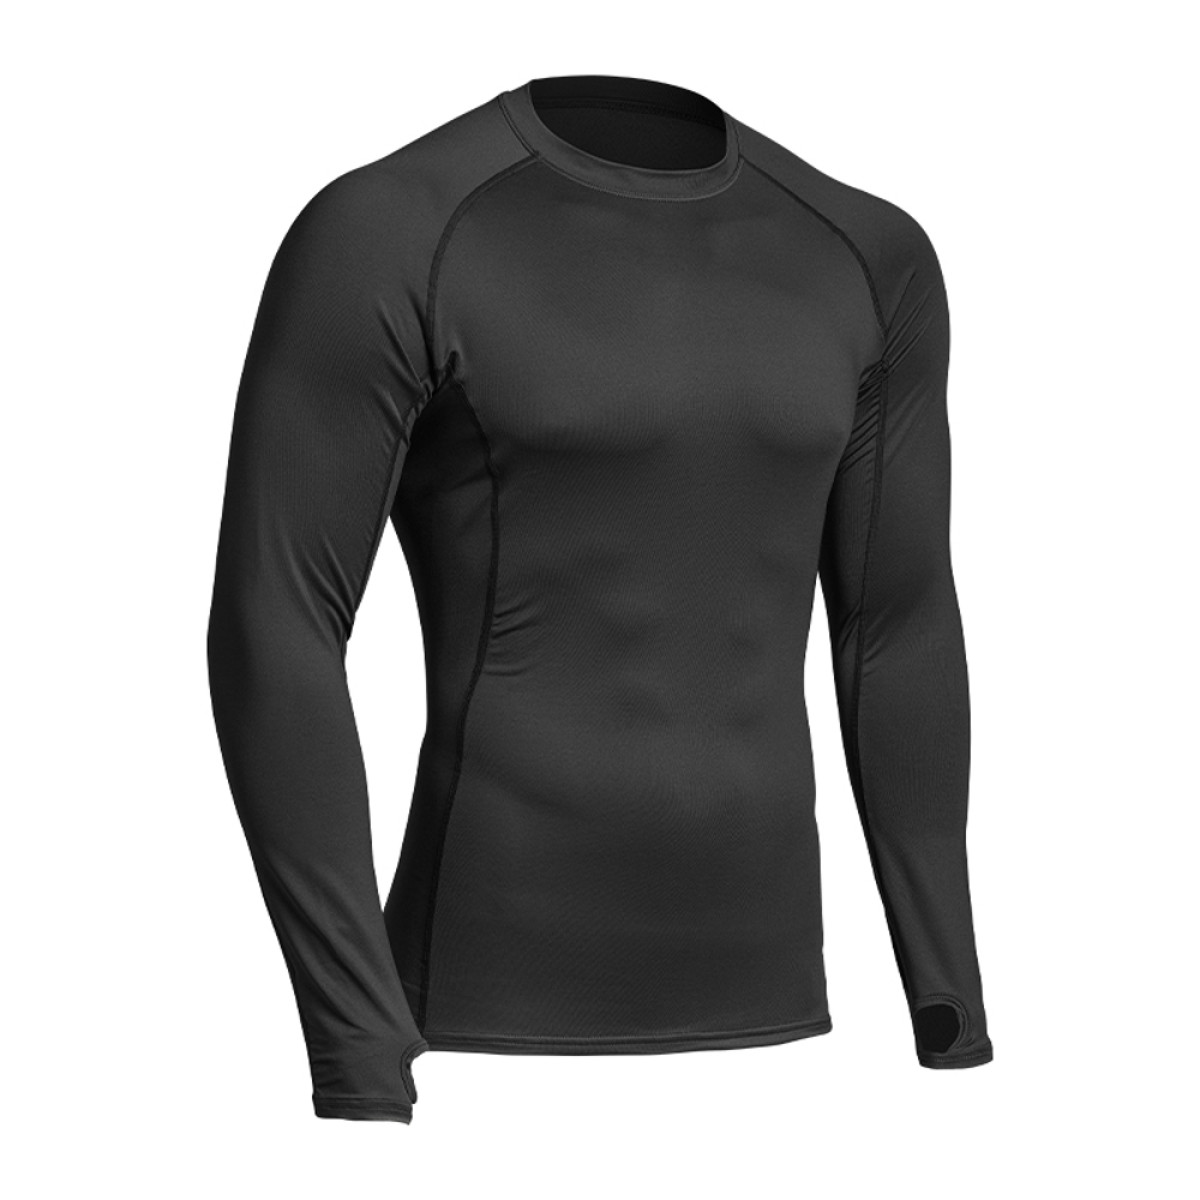 MAILLOT THERMO PERFORMER NIVEAU 3 HIVER FROID CONFORT MILITAIRE 